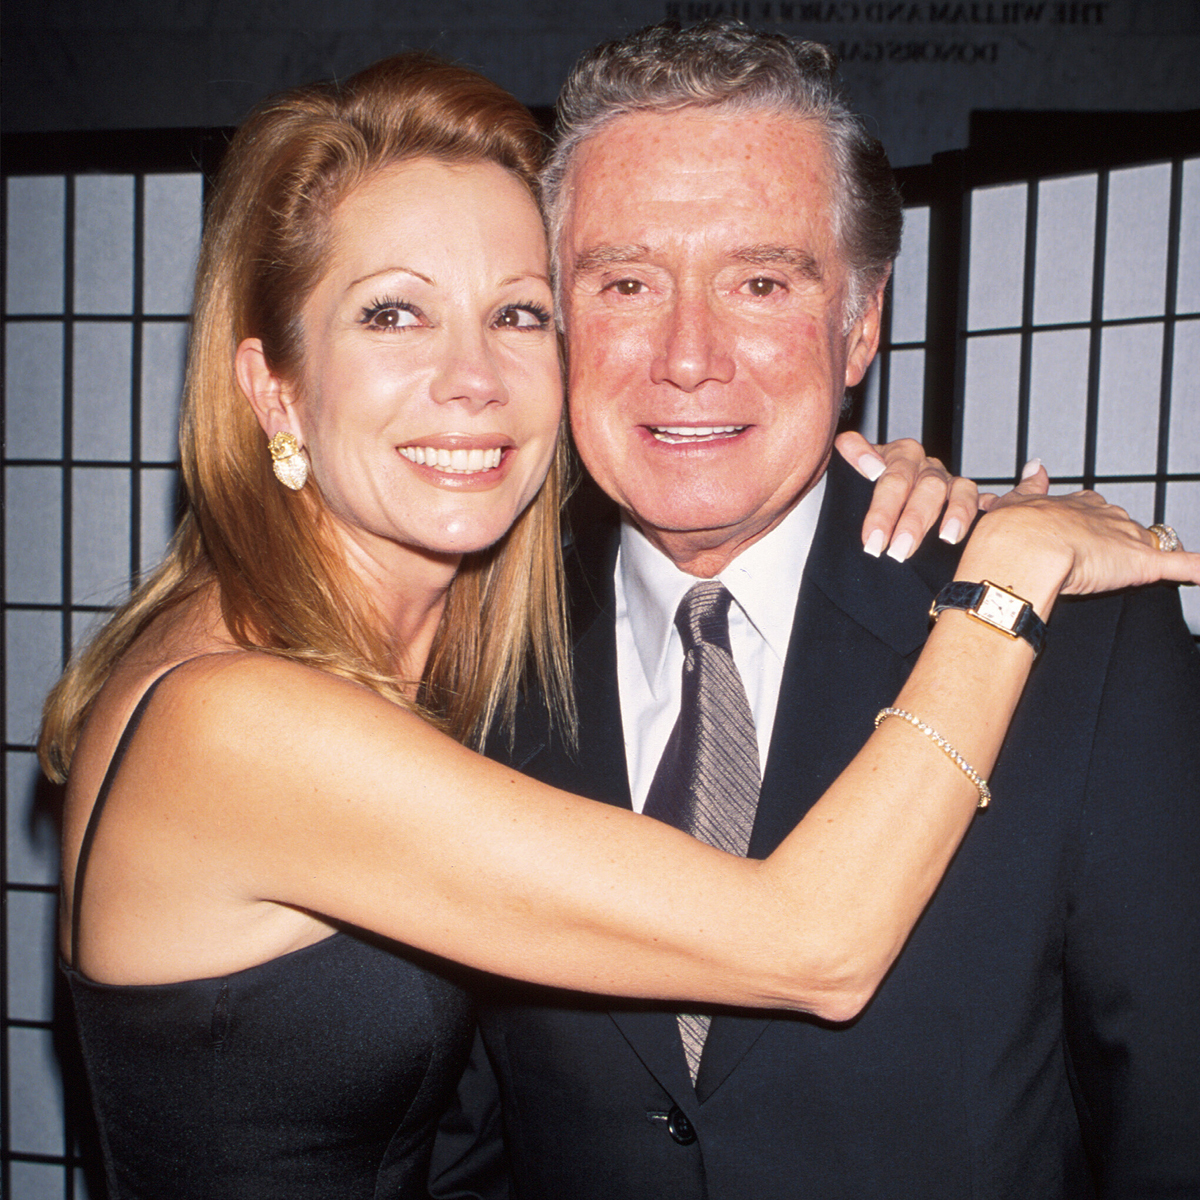 Regis Philbin News, Pictures, and Videos - E! Online - CA